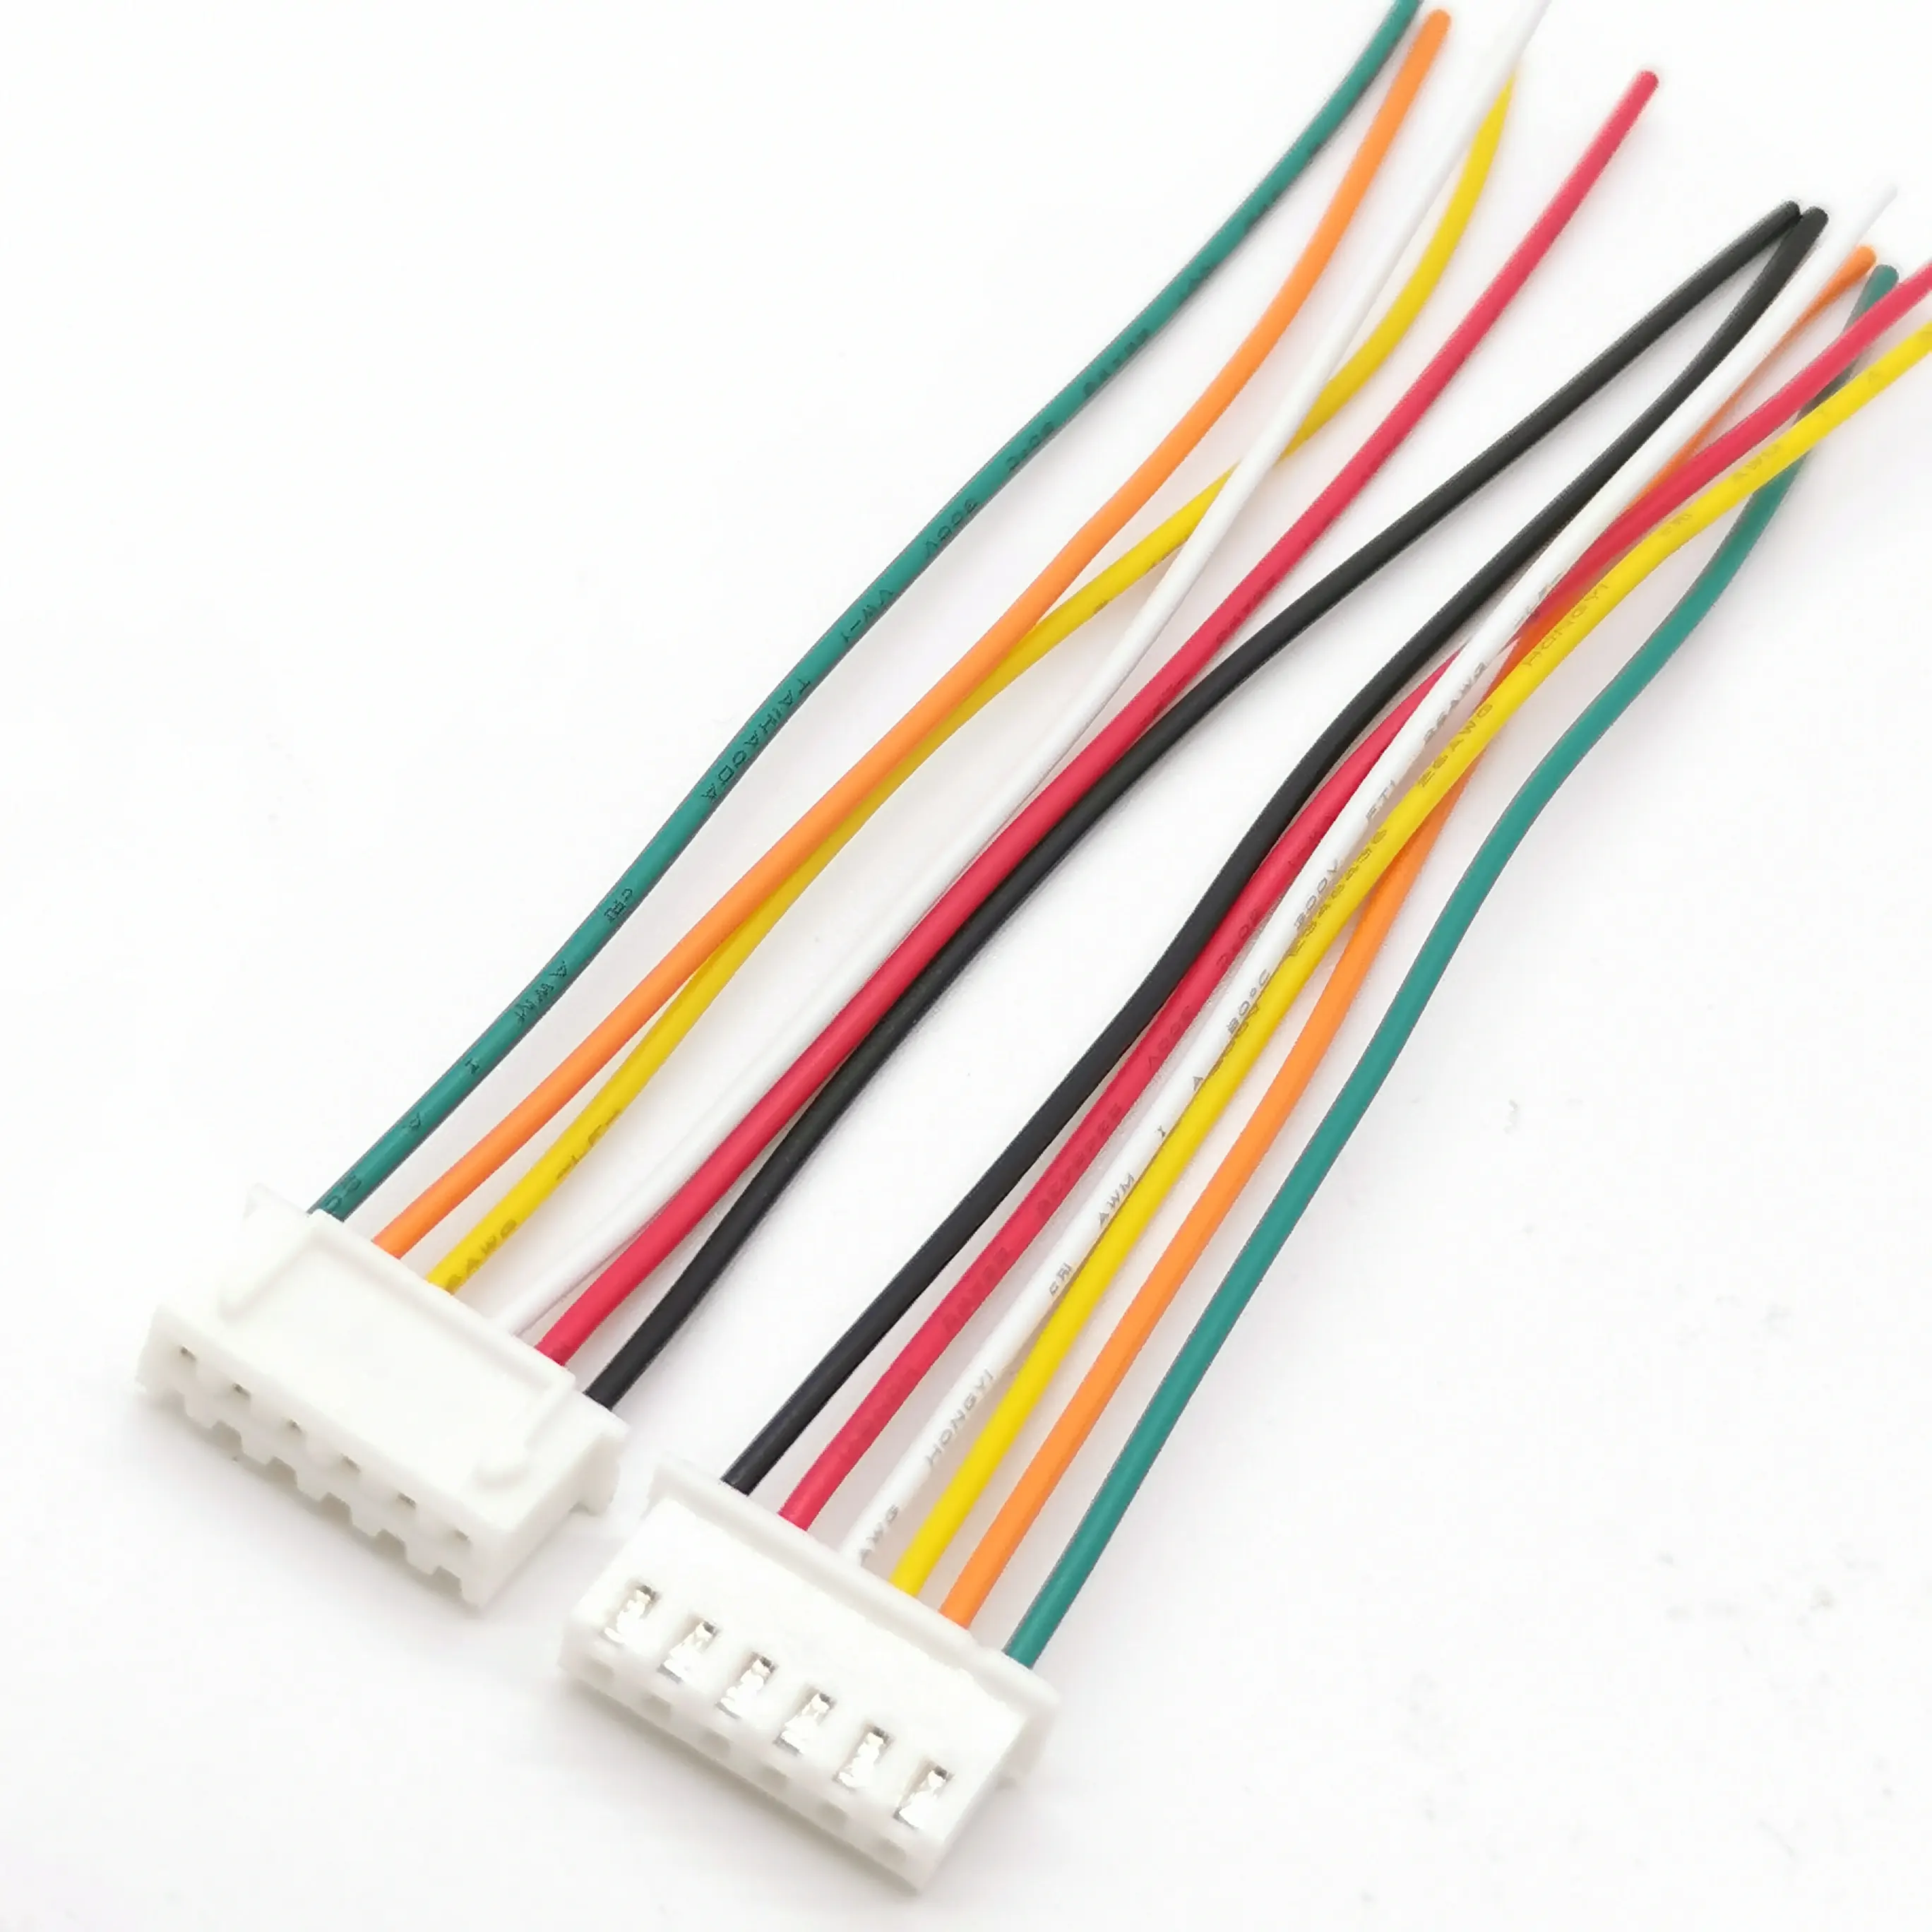 JST XH 2Pin black and white 2.5mm to dupont Wire Cable